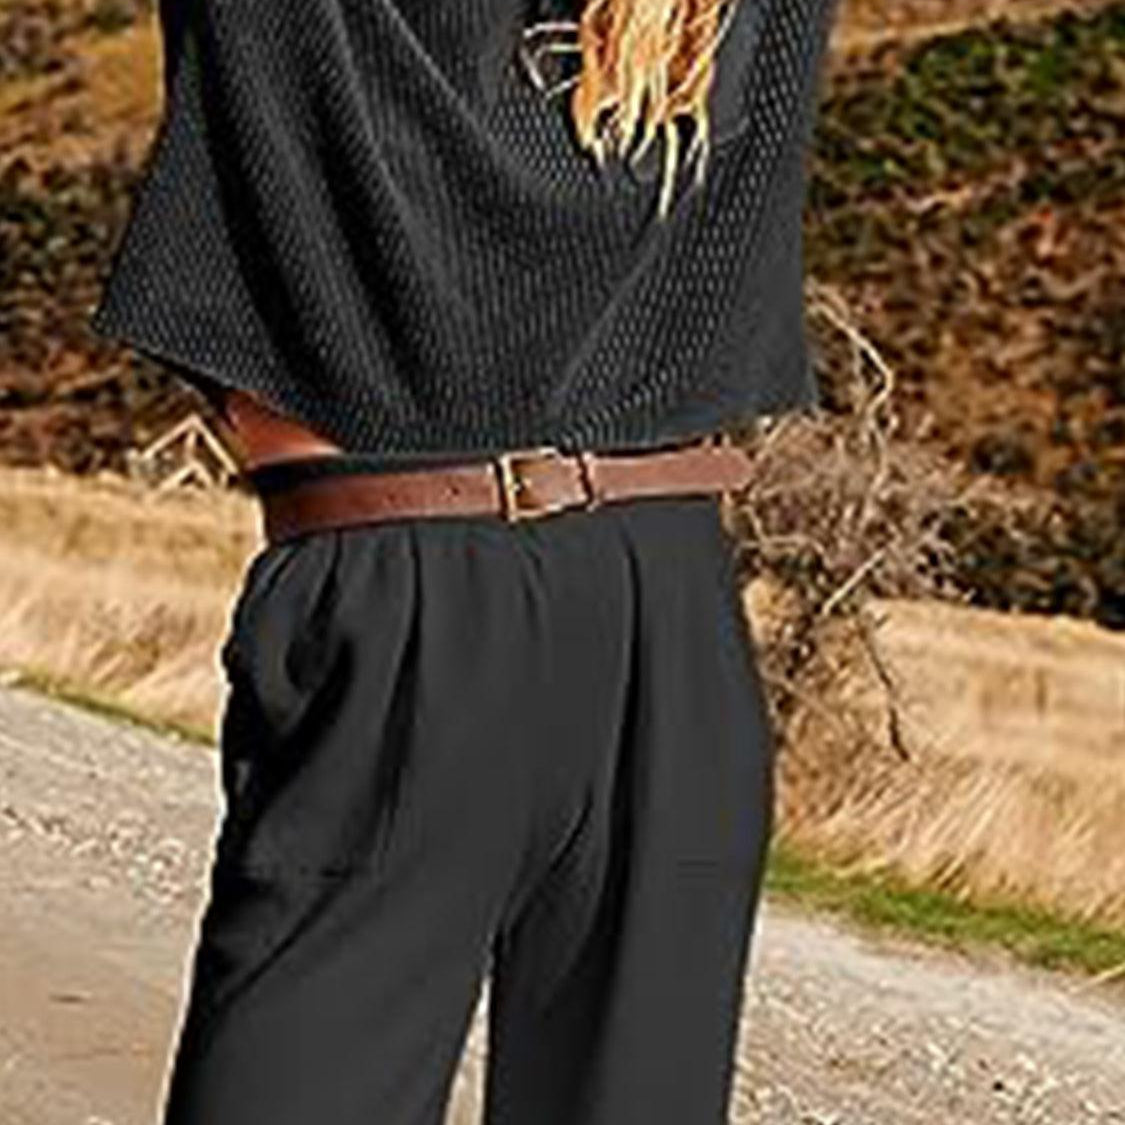 Women's Outfits & Sets Knit Top and Joggers Set